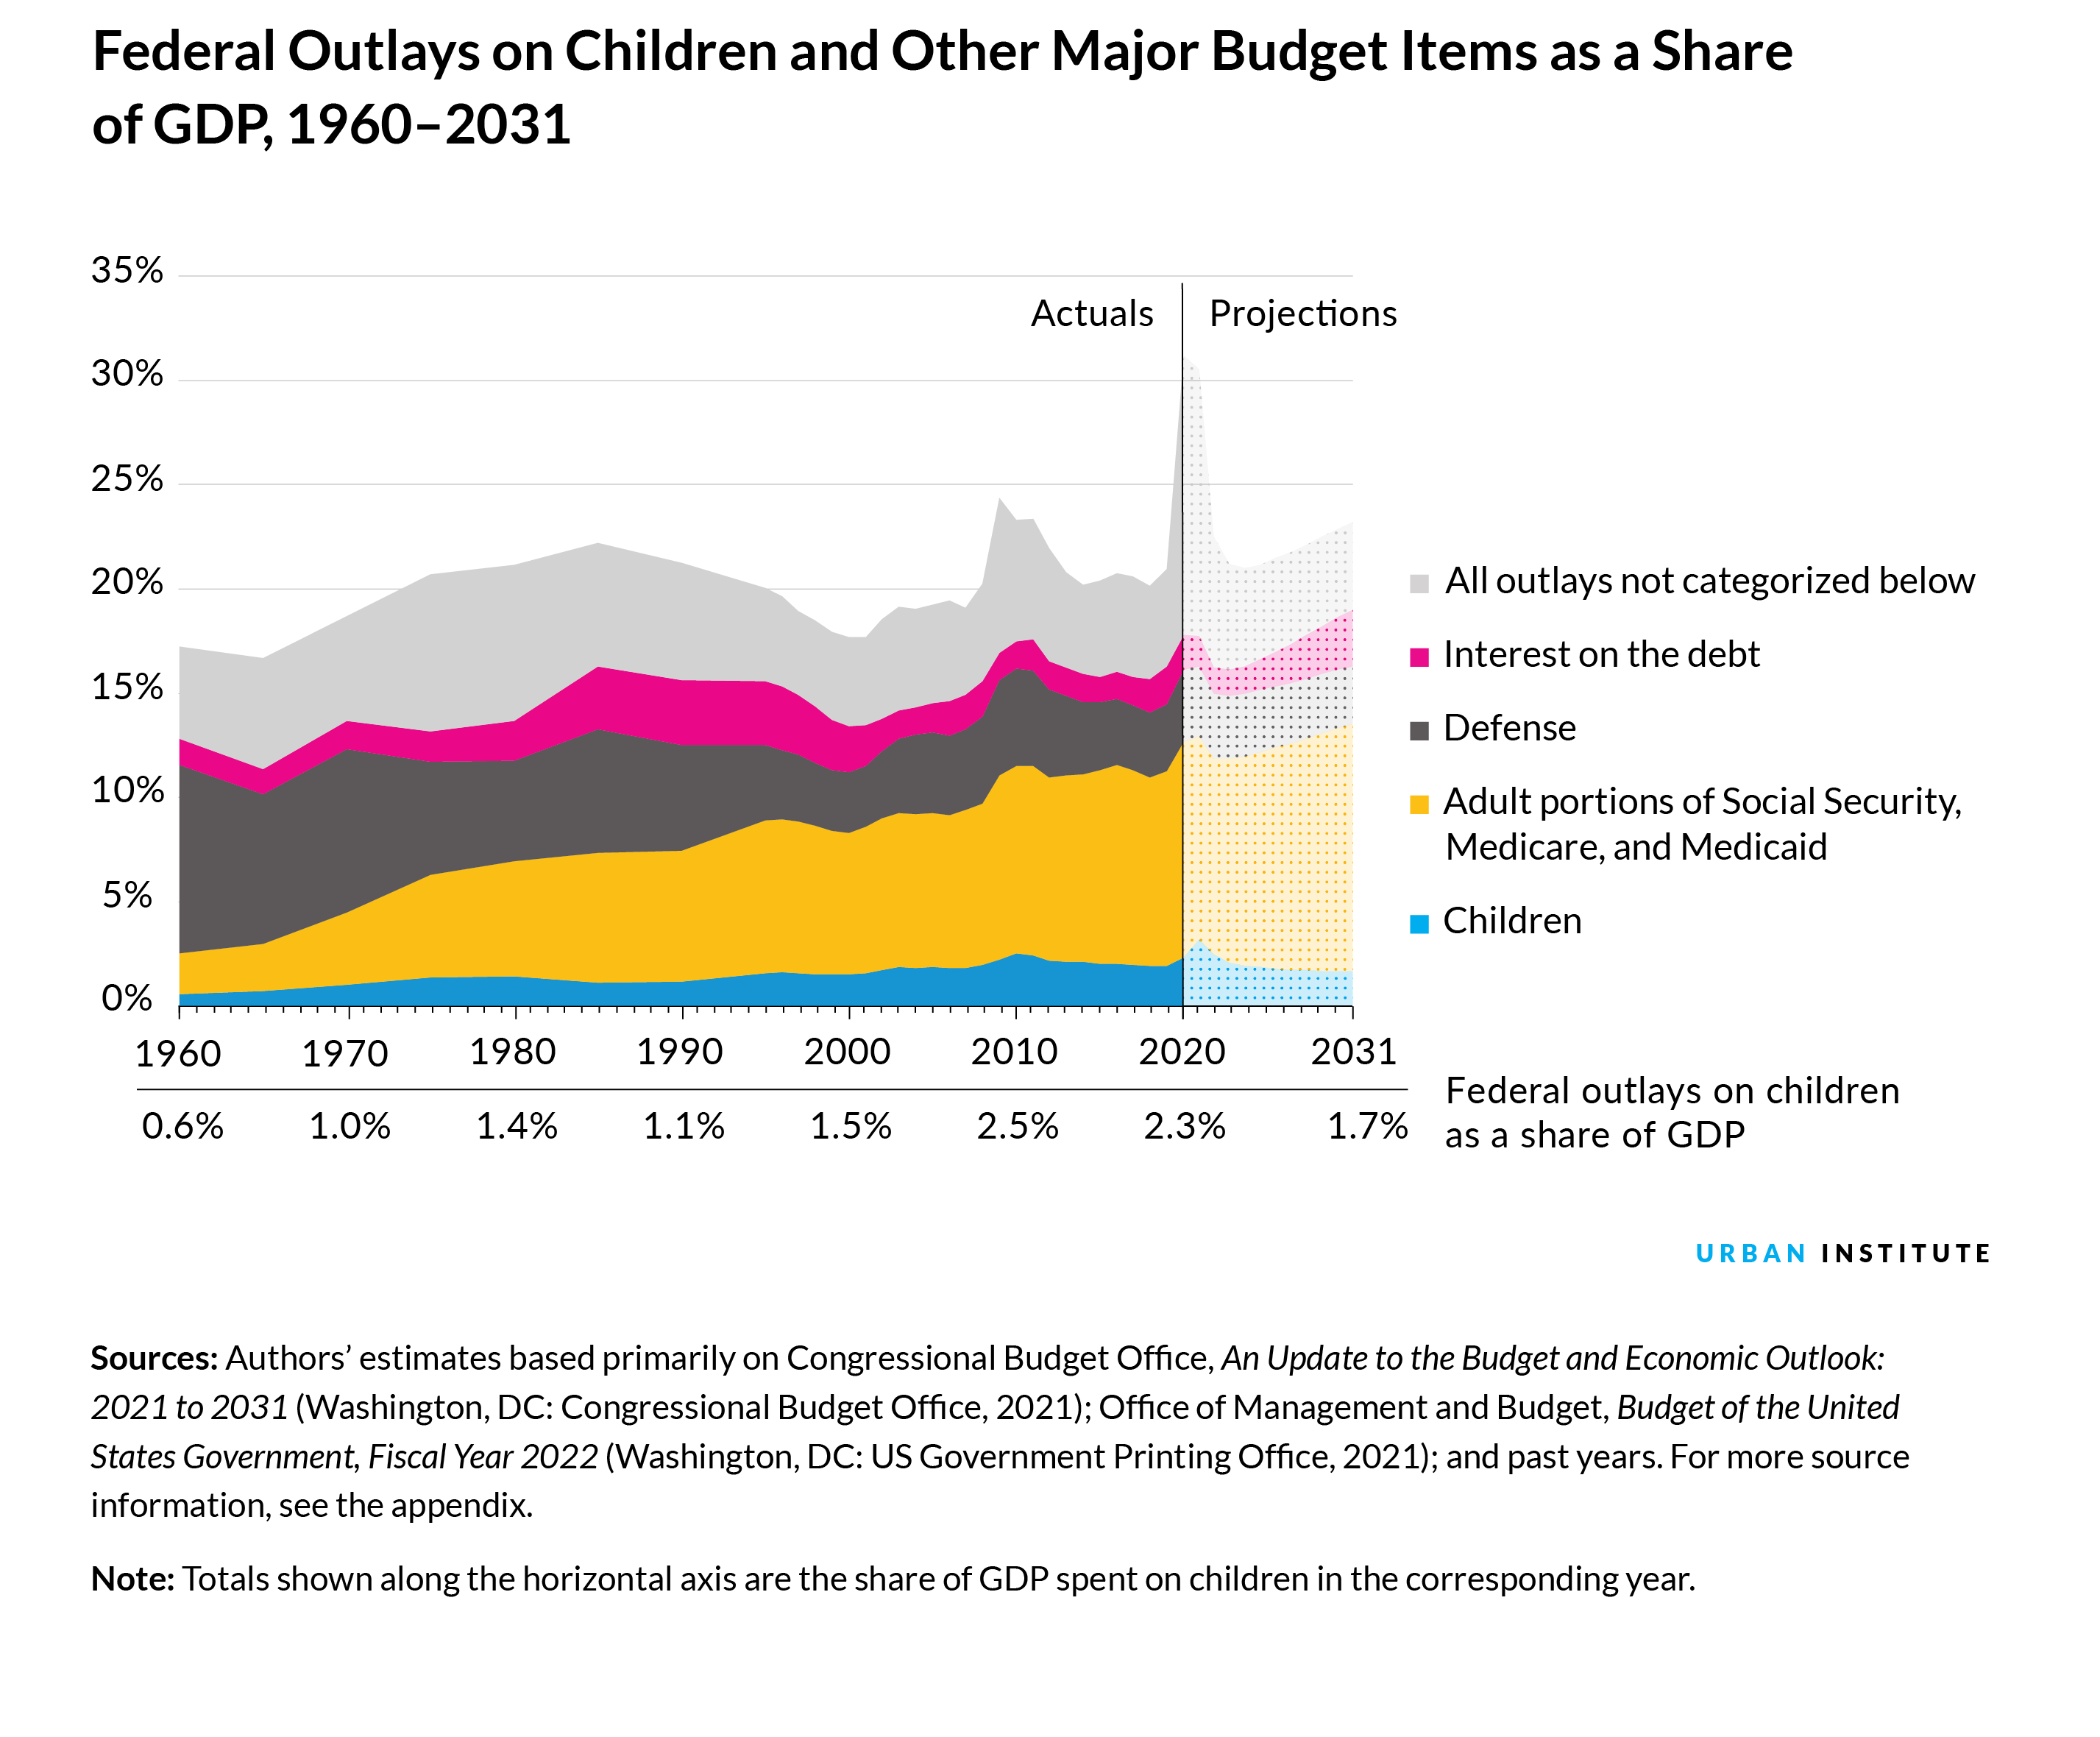 Federal Outlays on Children and Other Major Budget Items as a Share of GDP, 1960-2031